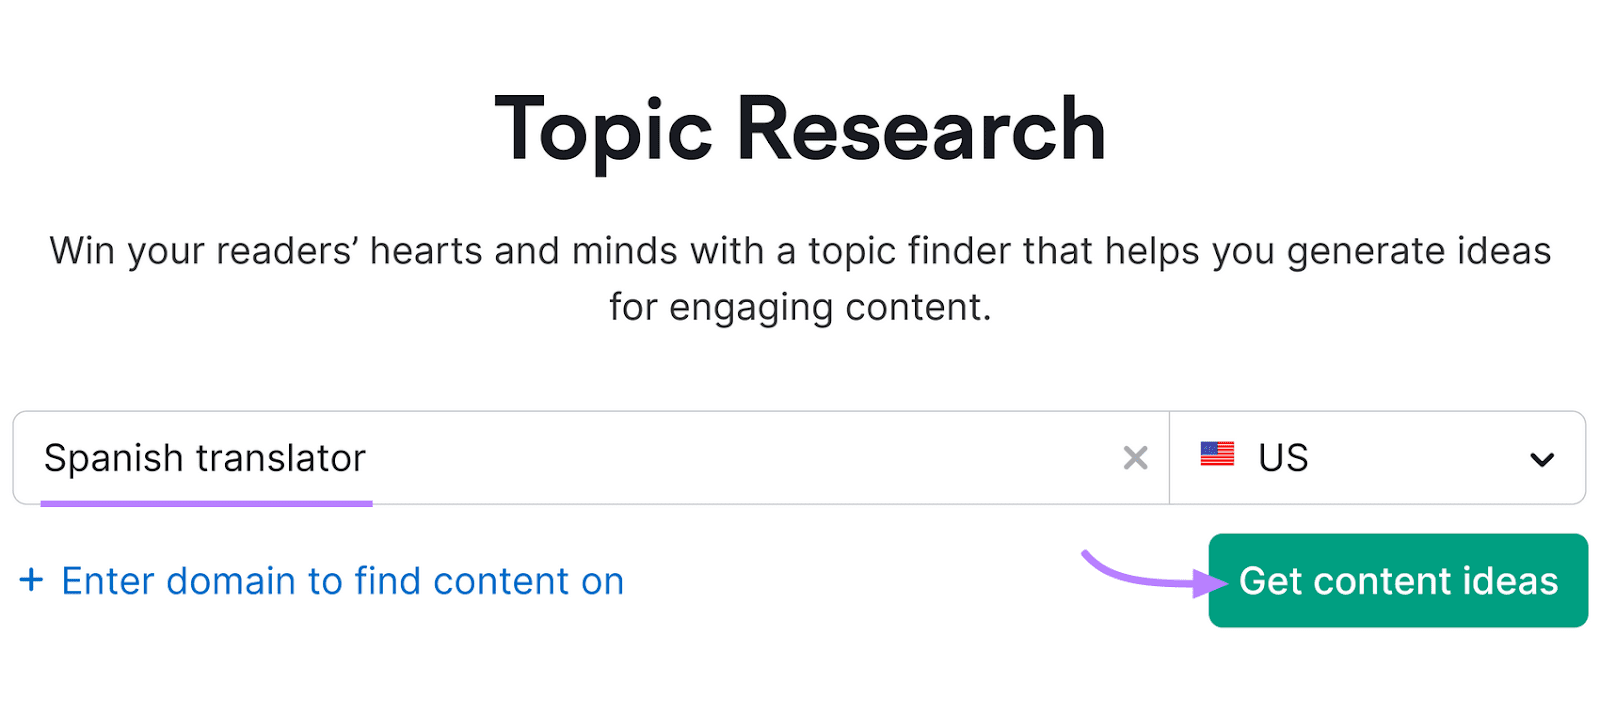 Topic Research user interface with "Spanish translator" in the search field and a highlighted "Get content ideas" button.